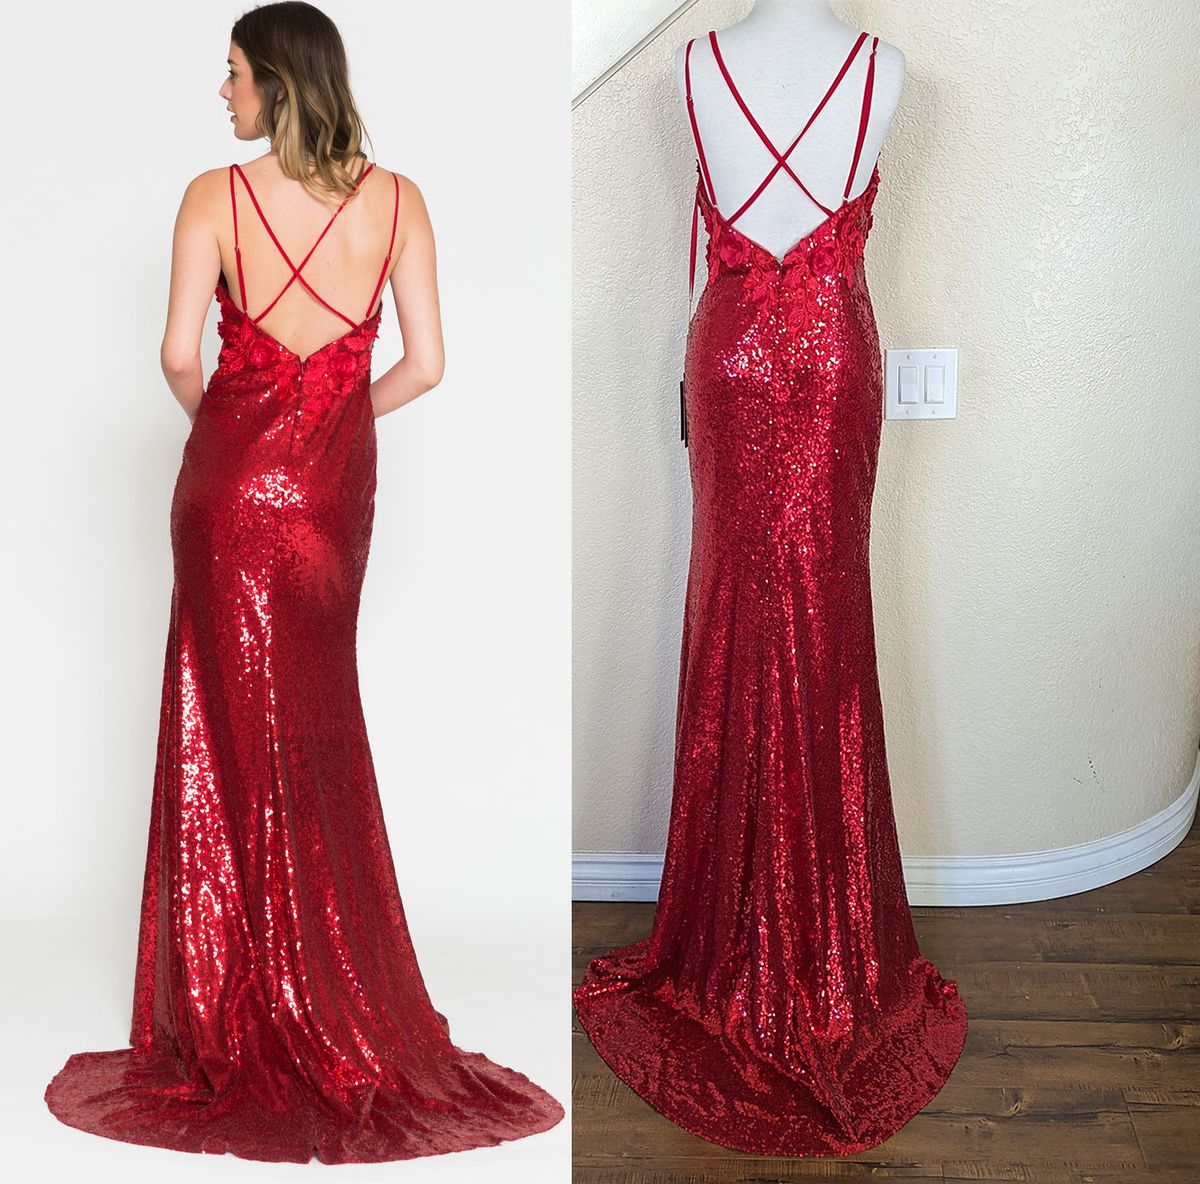 Style Red Sequined Floral Plunging V-Neck Mermaid Formal Gown Amelia Couture Size 4 Prom Plunge Floral Red Side Slit Dress on Queenly